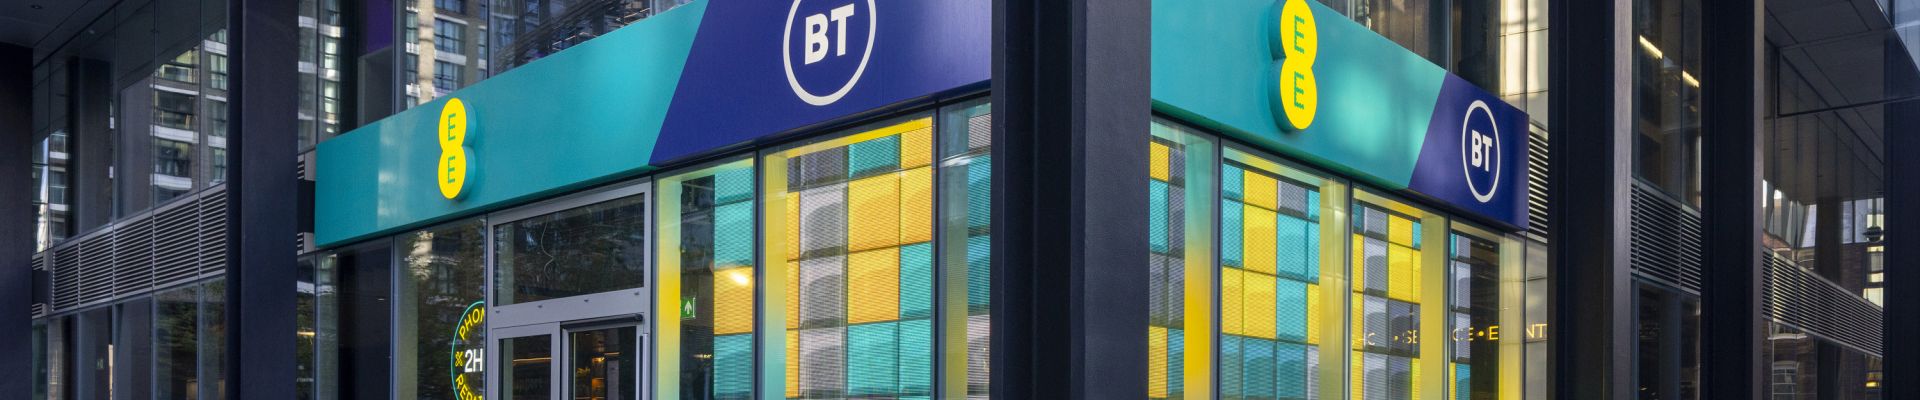 Global brand rollout for BT | Pearce Signs